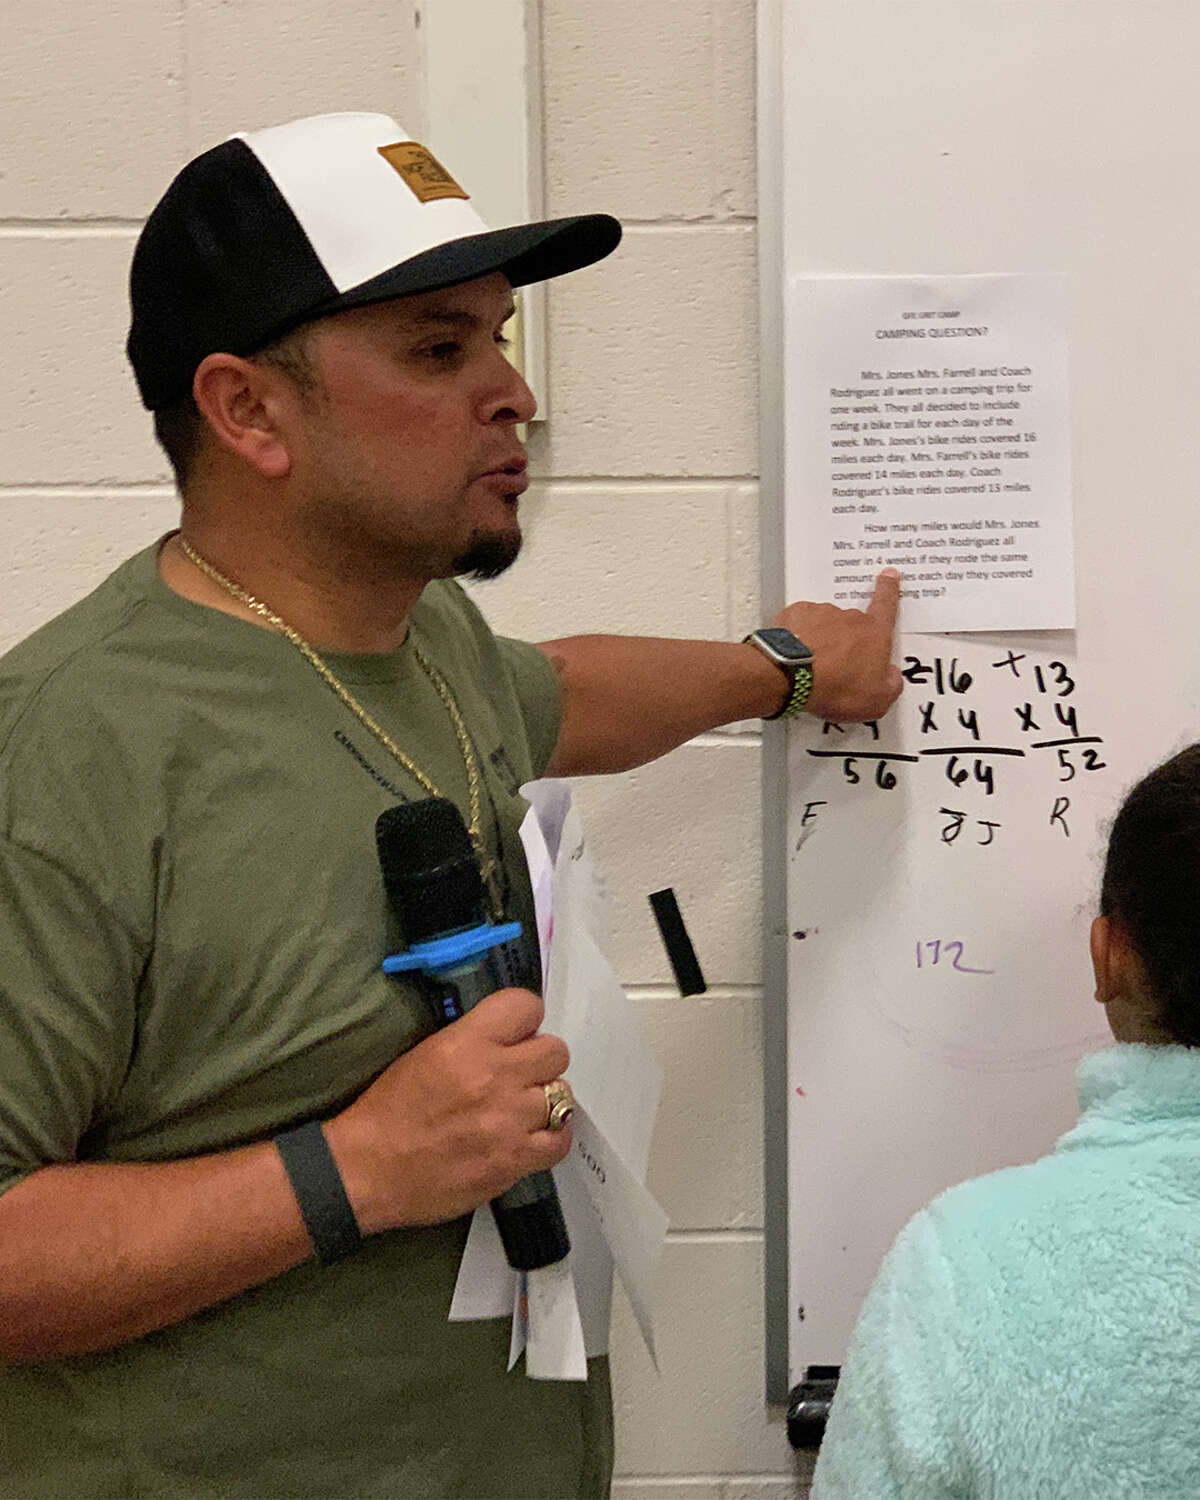 Students participate in learning activities during intersession week at Franks Elementary on Monday. Franks' camping theme featured fun learning spaces and interactive activities. 